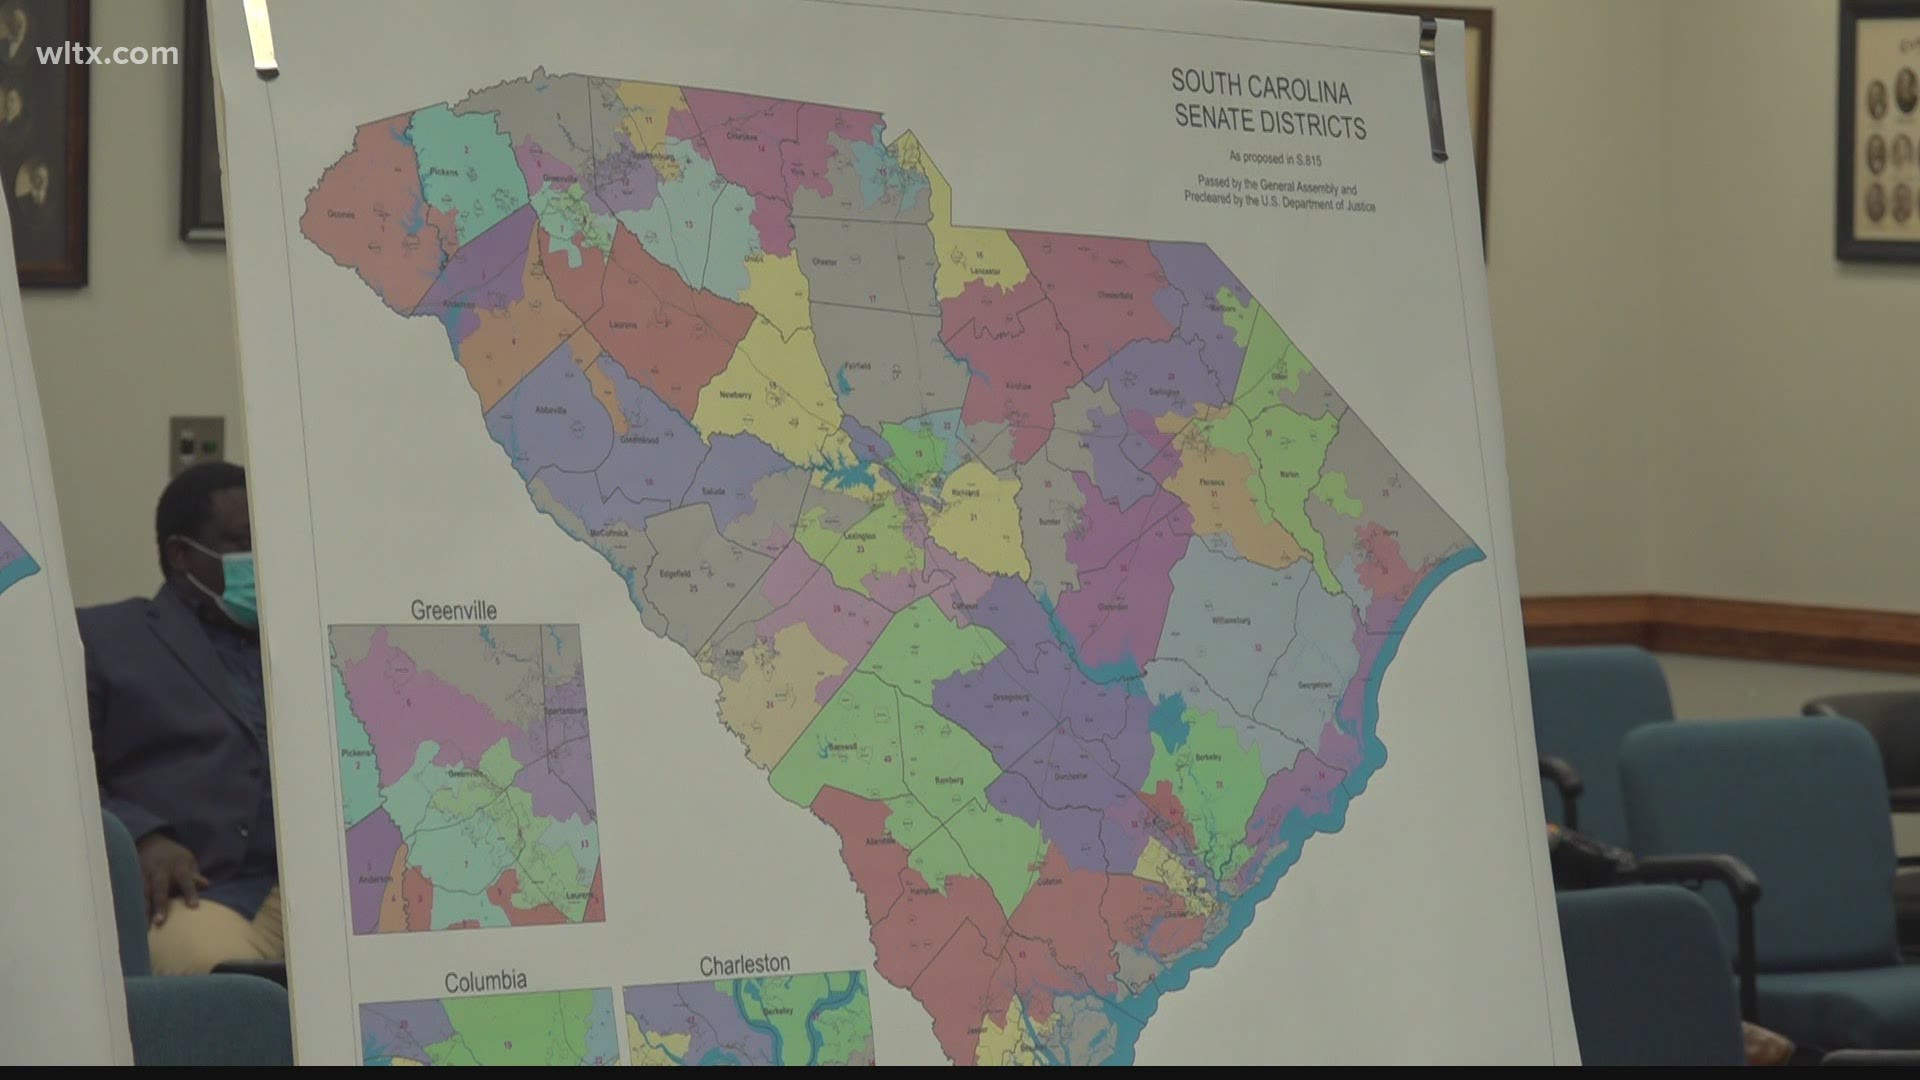 The Senate Judiciary Committee’s Redistricting Subcommittee has scheduled 10 public hearings to hear what things should be considered in redrawing SC districts.